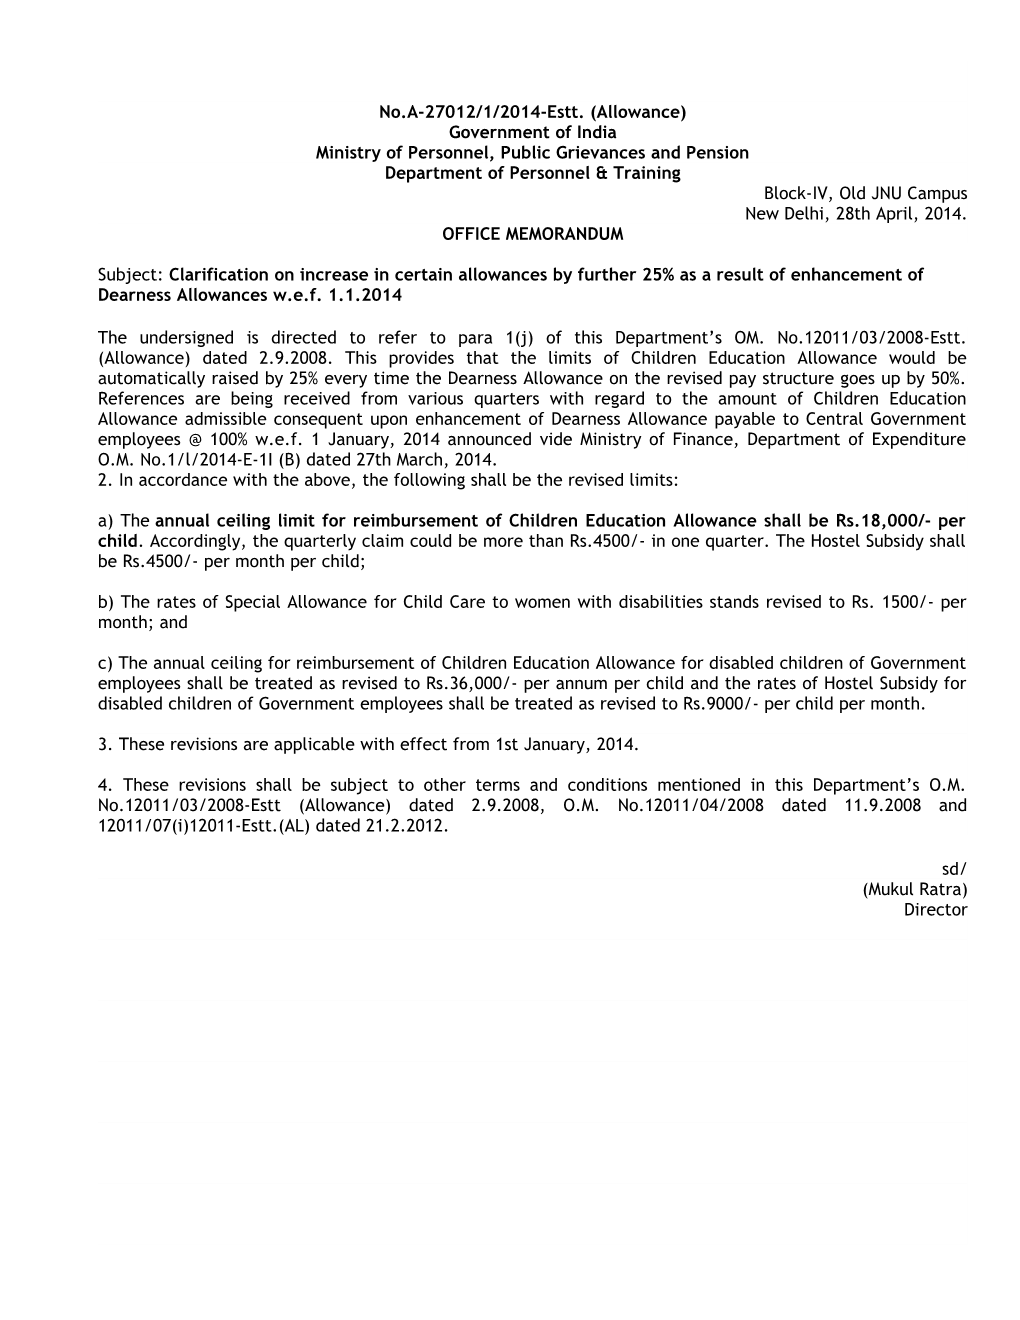 Ministry of Personnel, Public Grievances and Pension